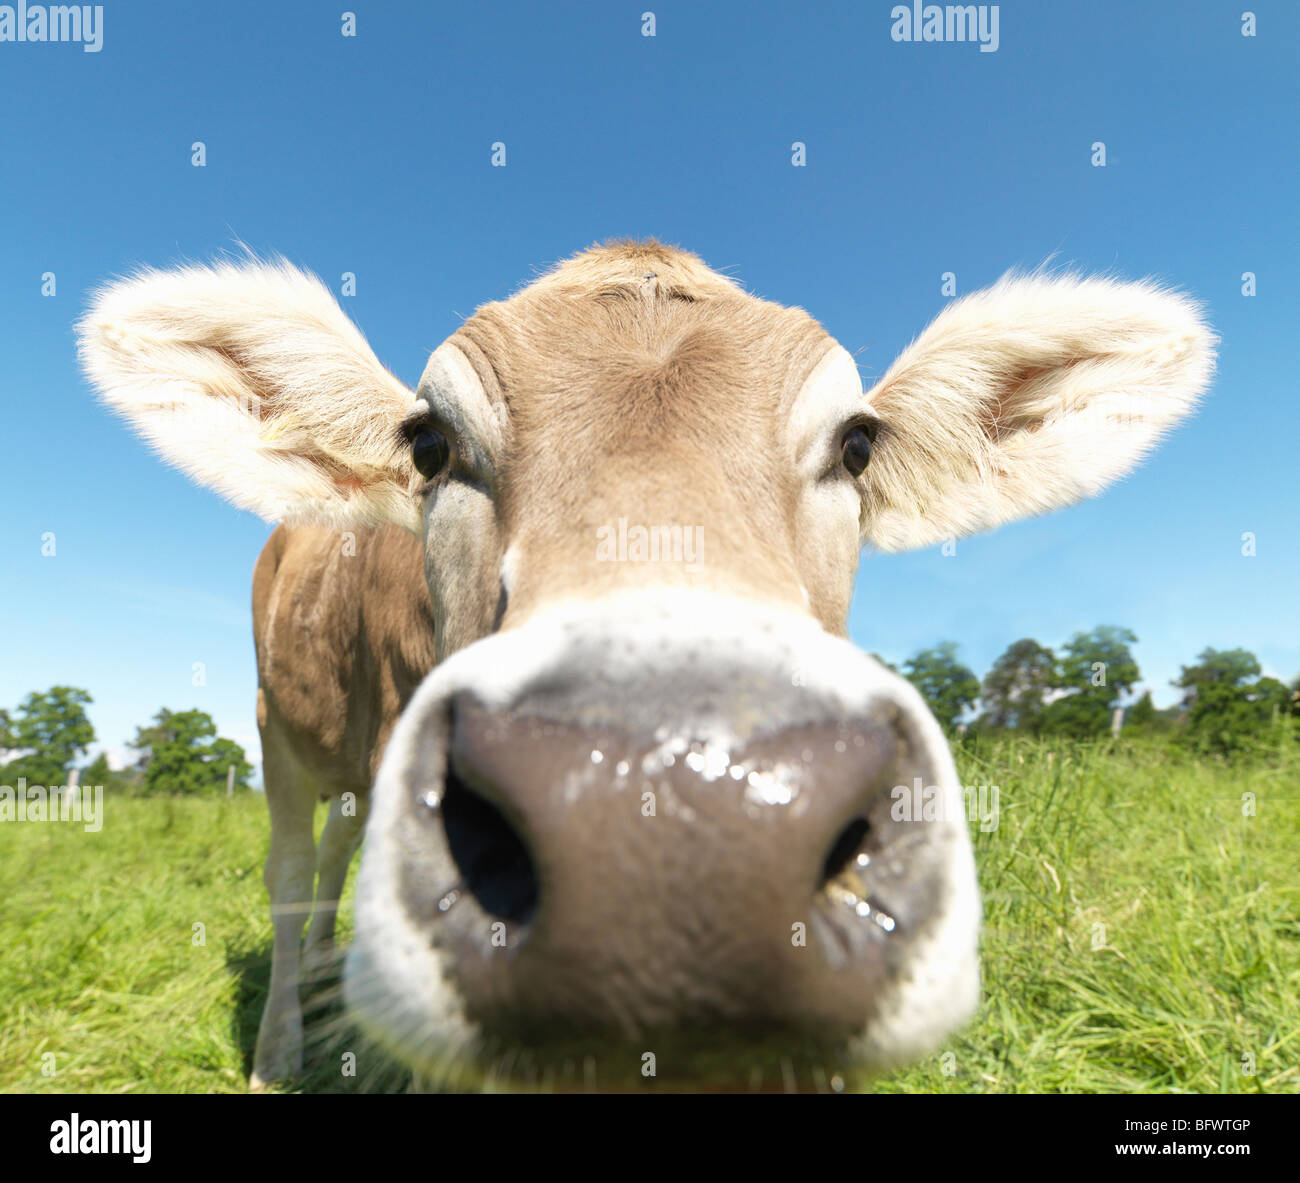 Cow in field, close-up Stock Photo